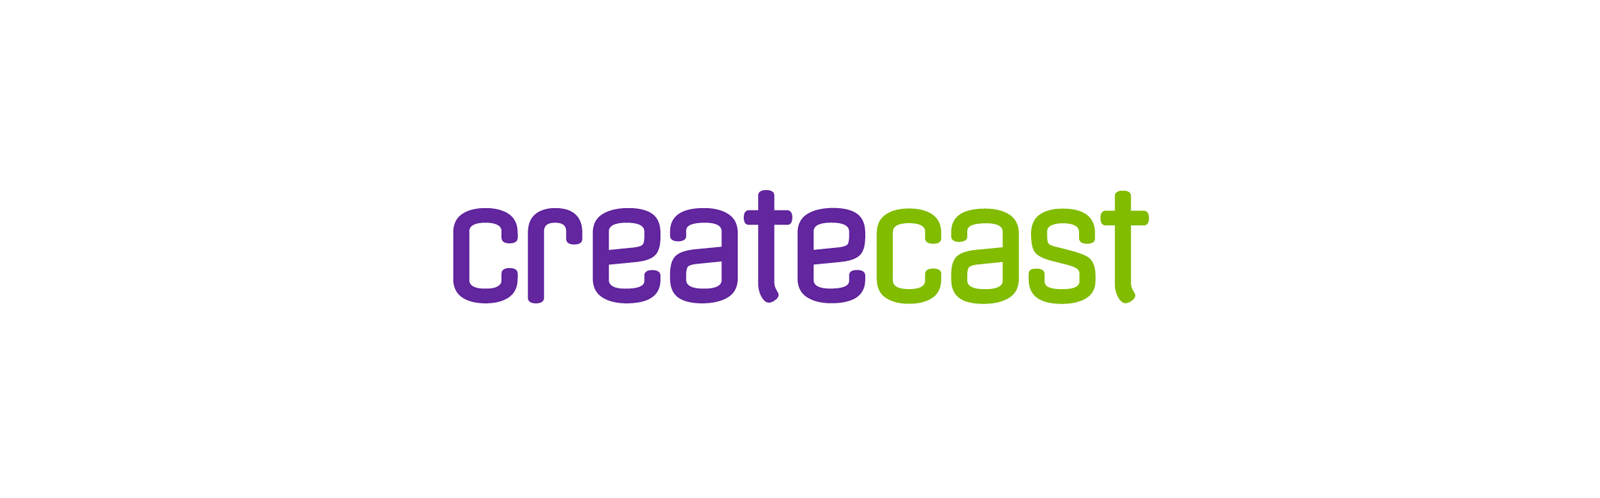 create-cast-name.png